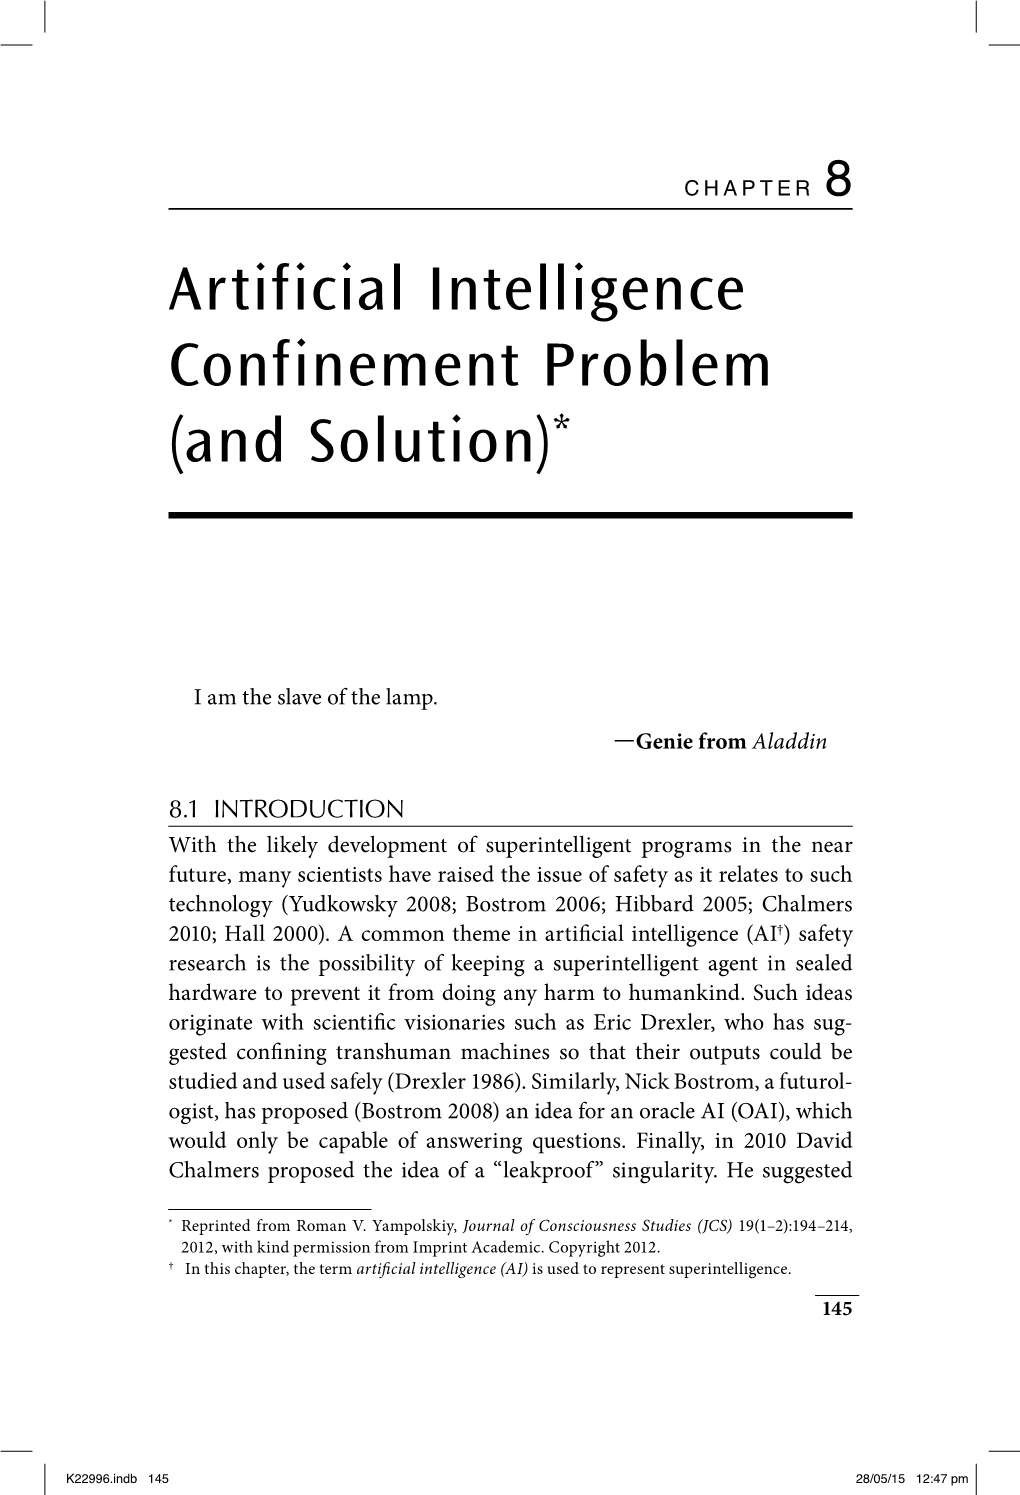 Artificial Intelligence Confinement Problem (And Solution)*